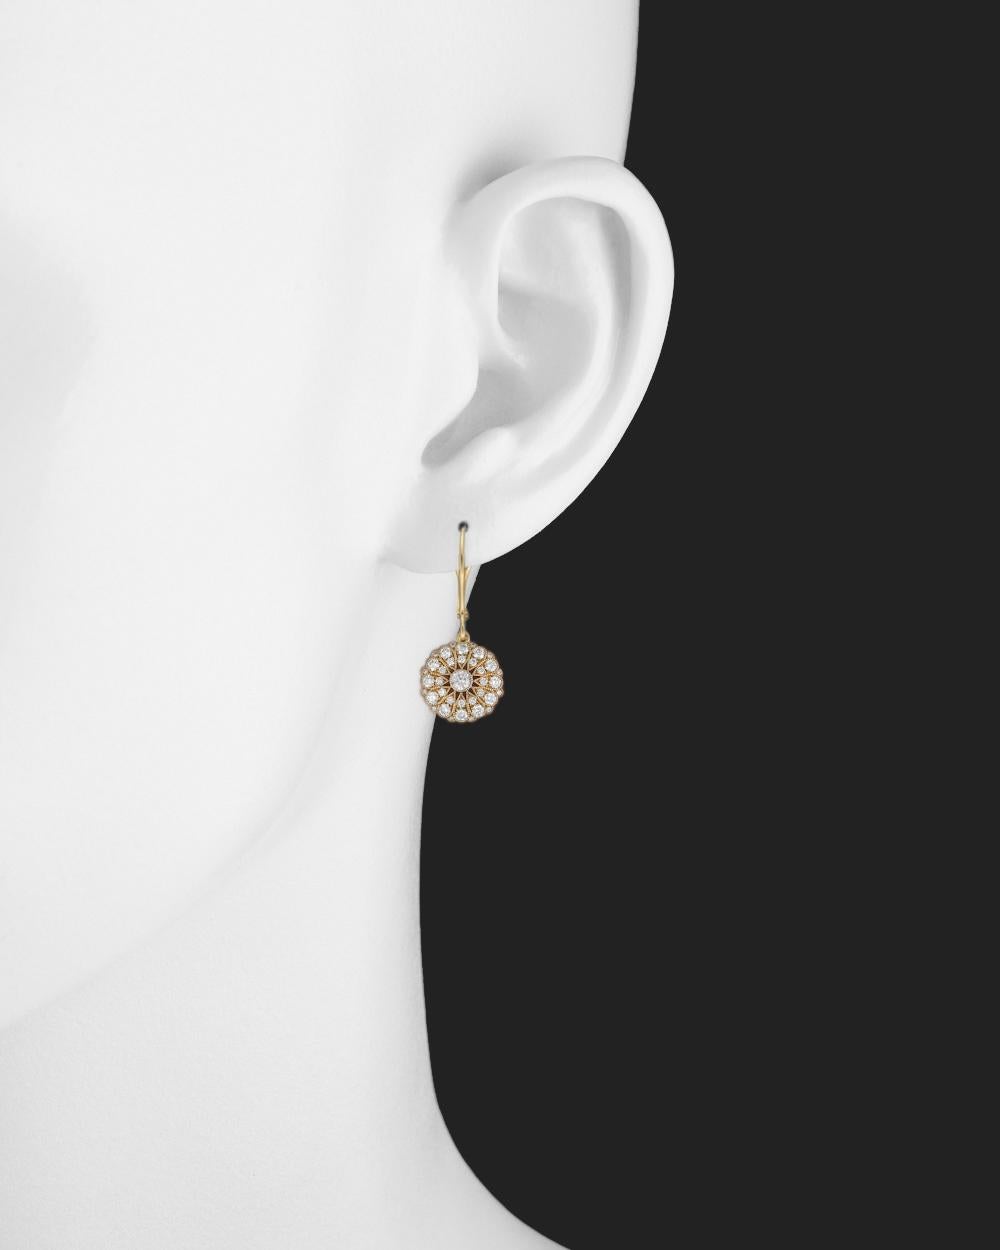 Circular-shaped diamond cluster drop earrings, in 18k yellow gold with elegant milgraining, scalloped frame and bezel-set diamond accent at the base. Cluster suspended from a polished 18k yellow gold French wire with hinged leverback. Diamonds